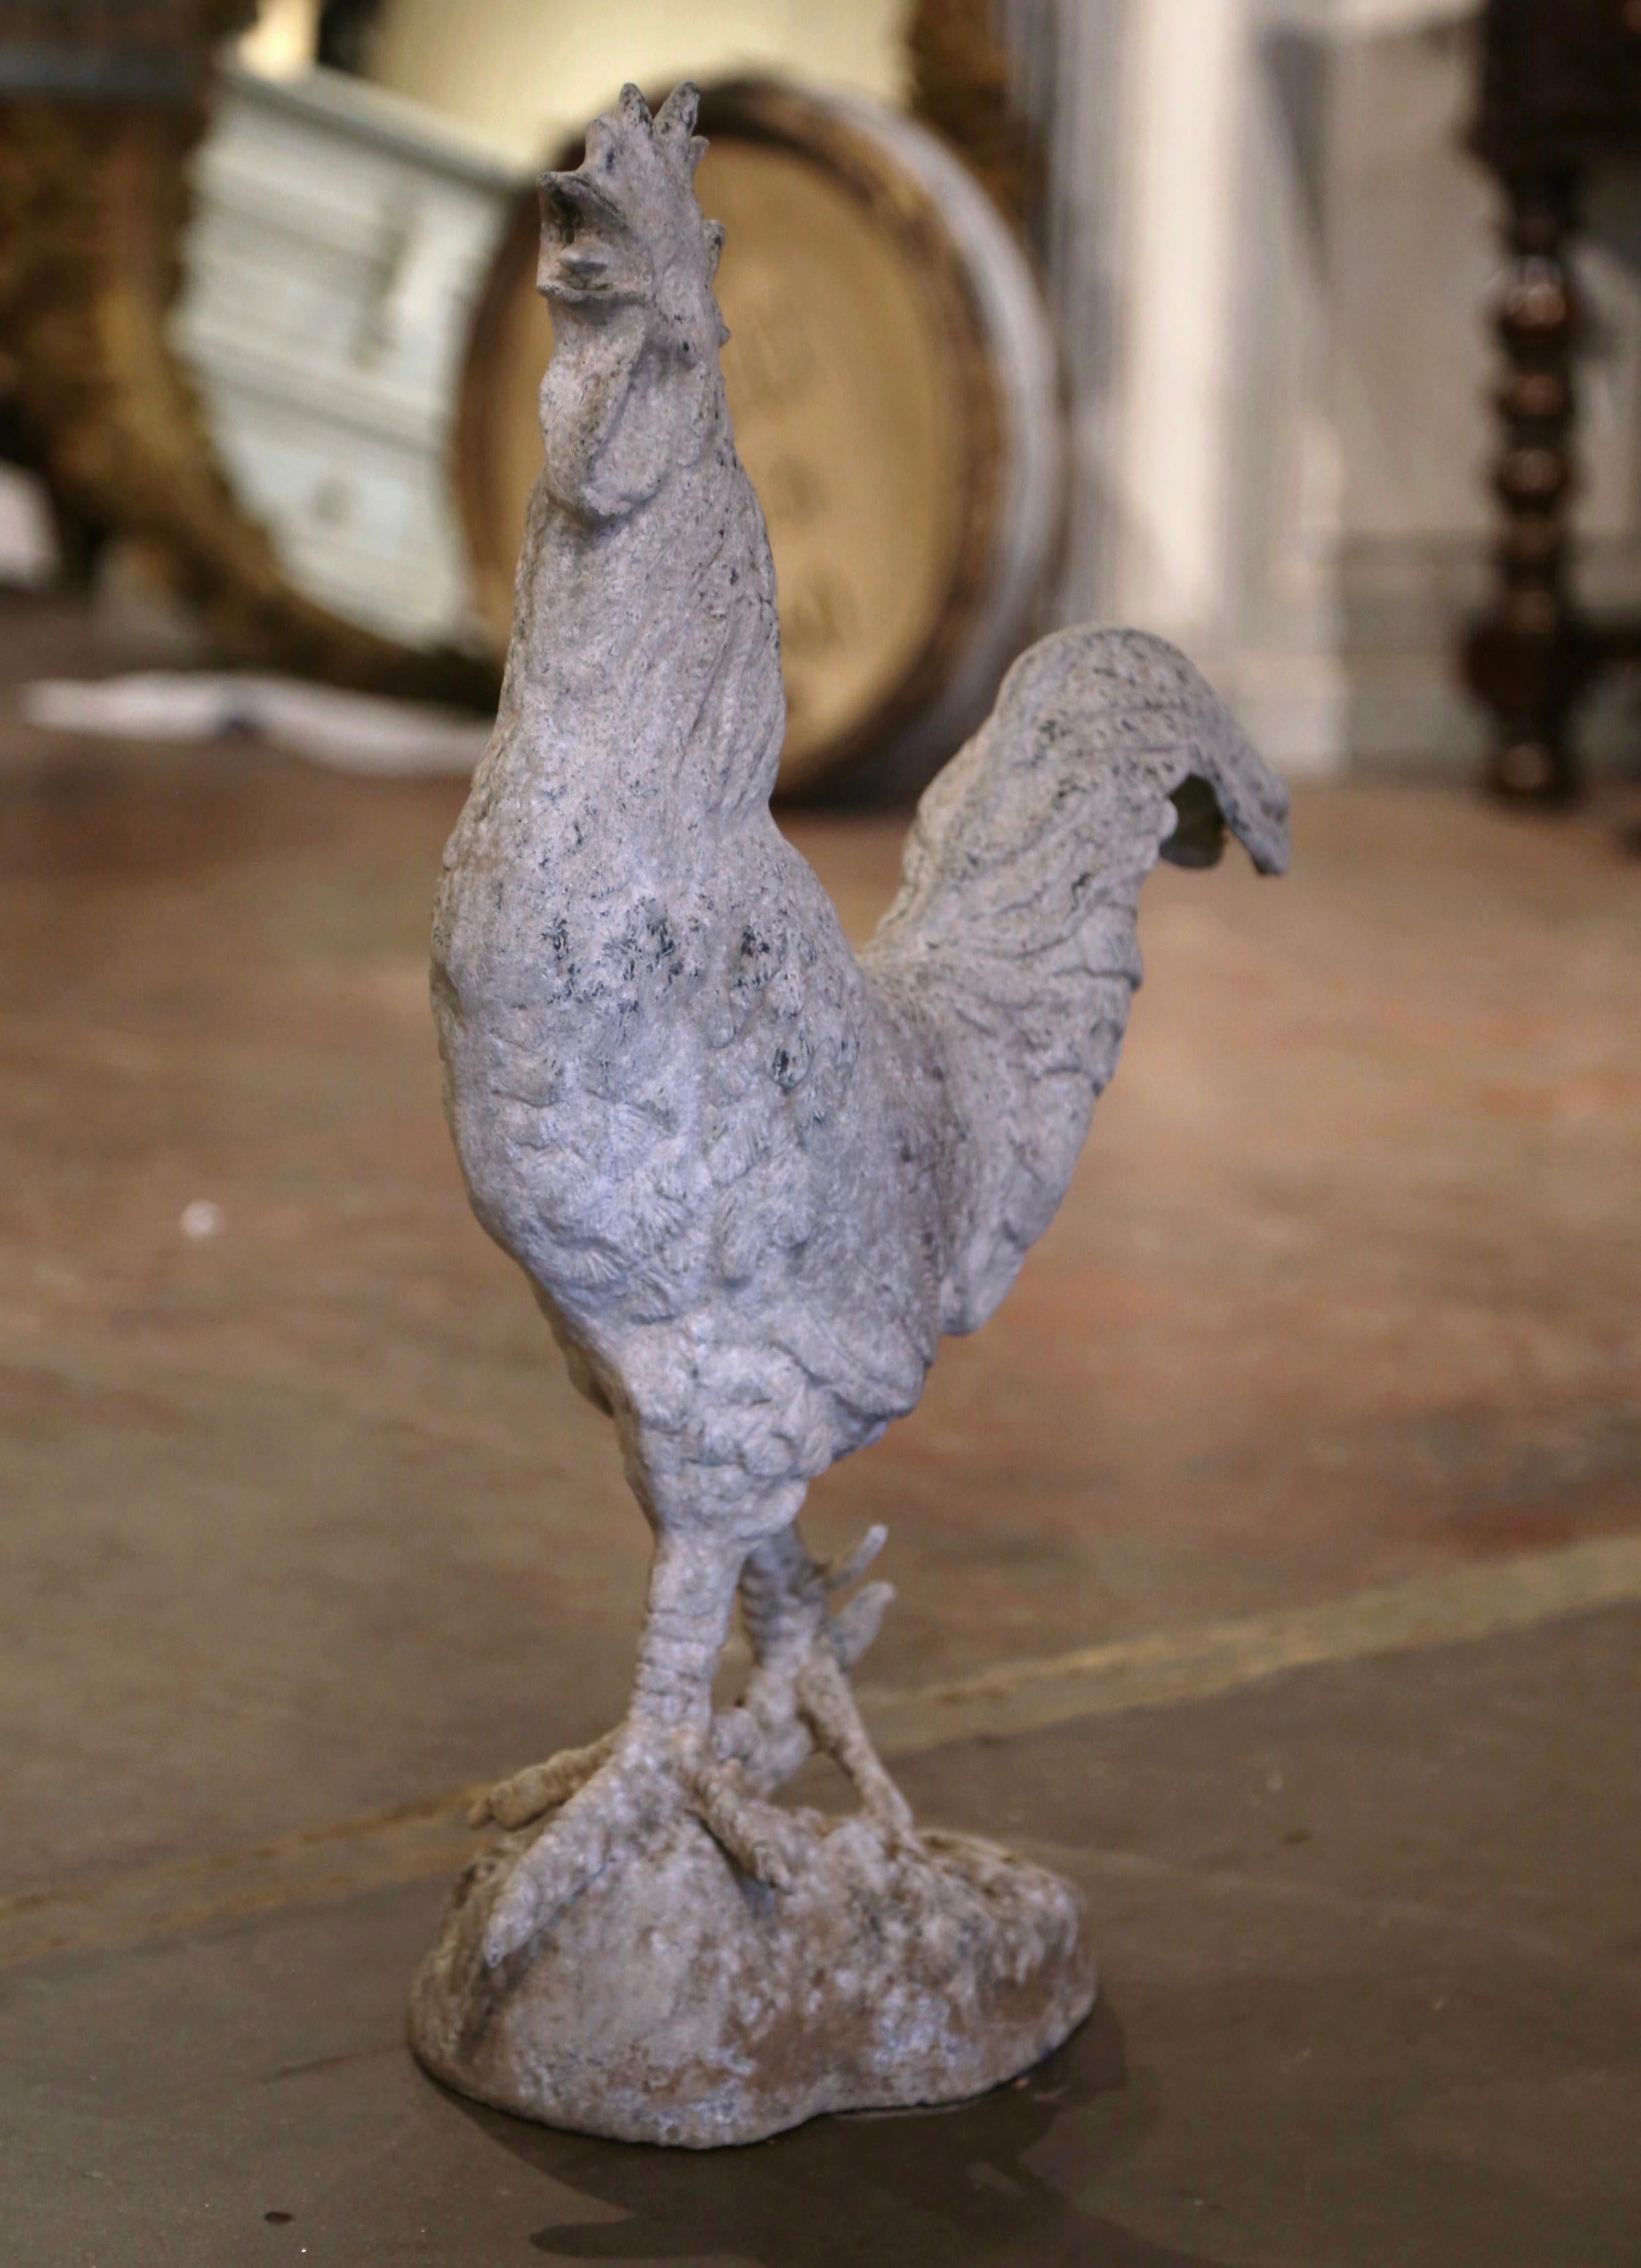 Decorate a patio or garden with this elegant antique French rooster. Crafted in France circa 1920 and made of metal, the sculpture depicts a proud crowing chanticleer rising on a molded base filled with concrete; wonderful details including the